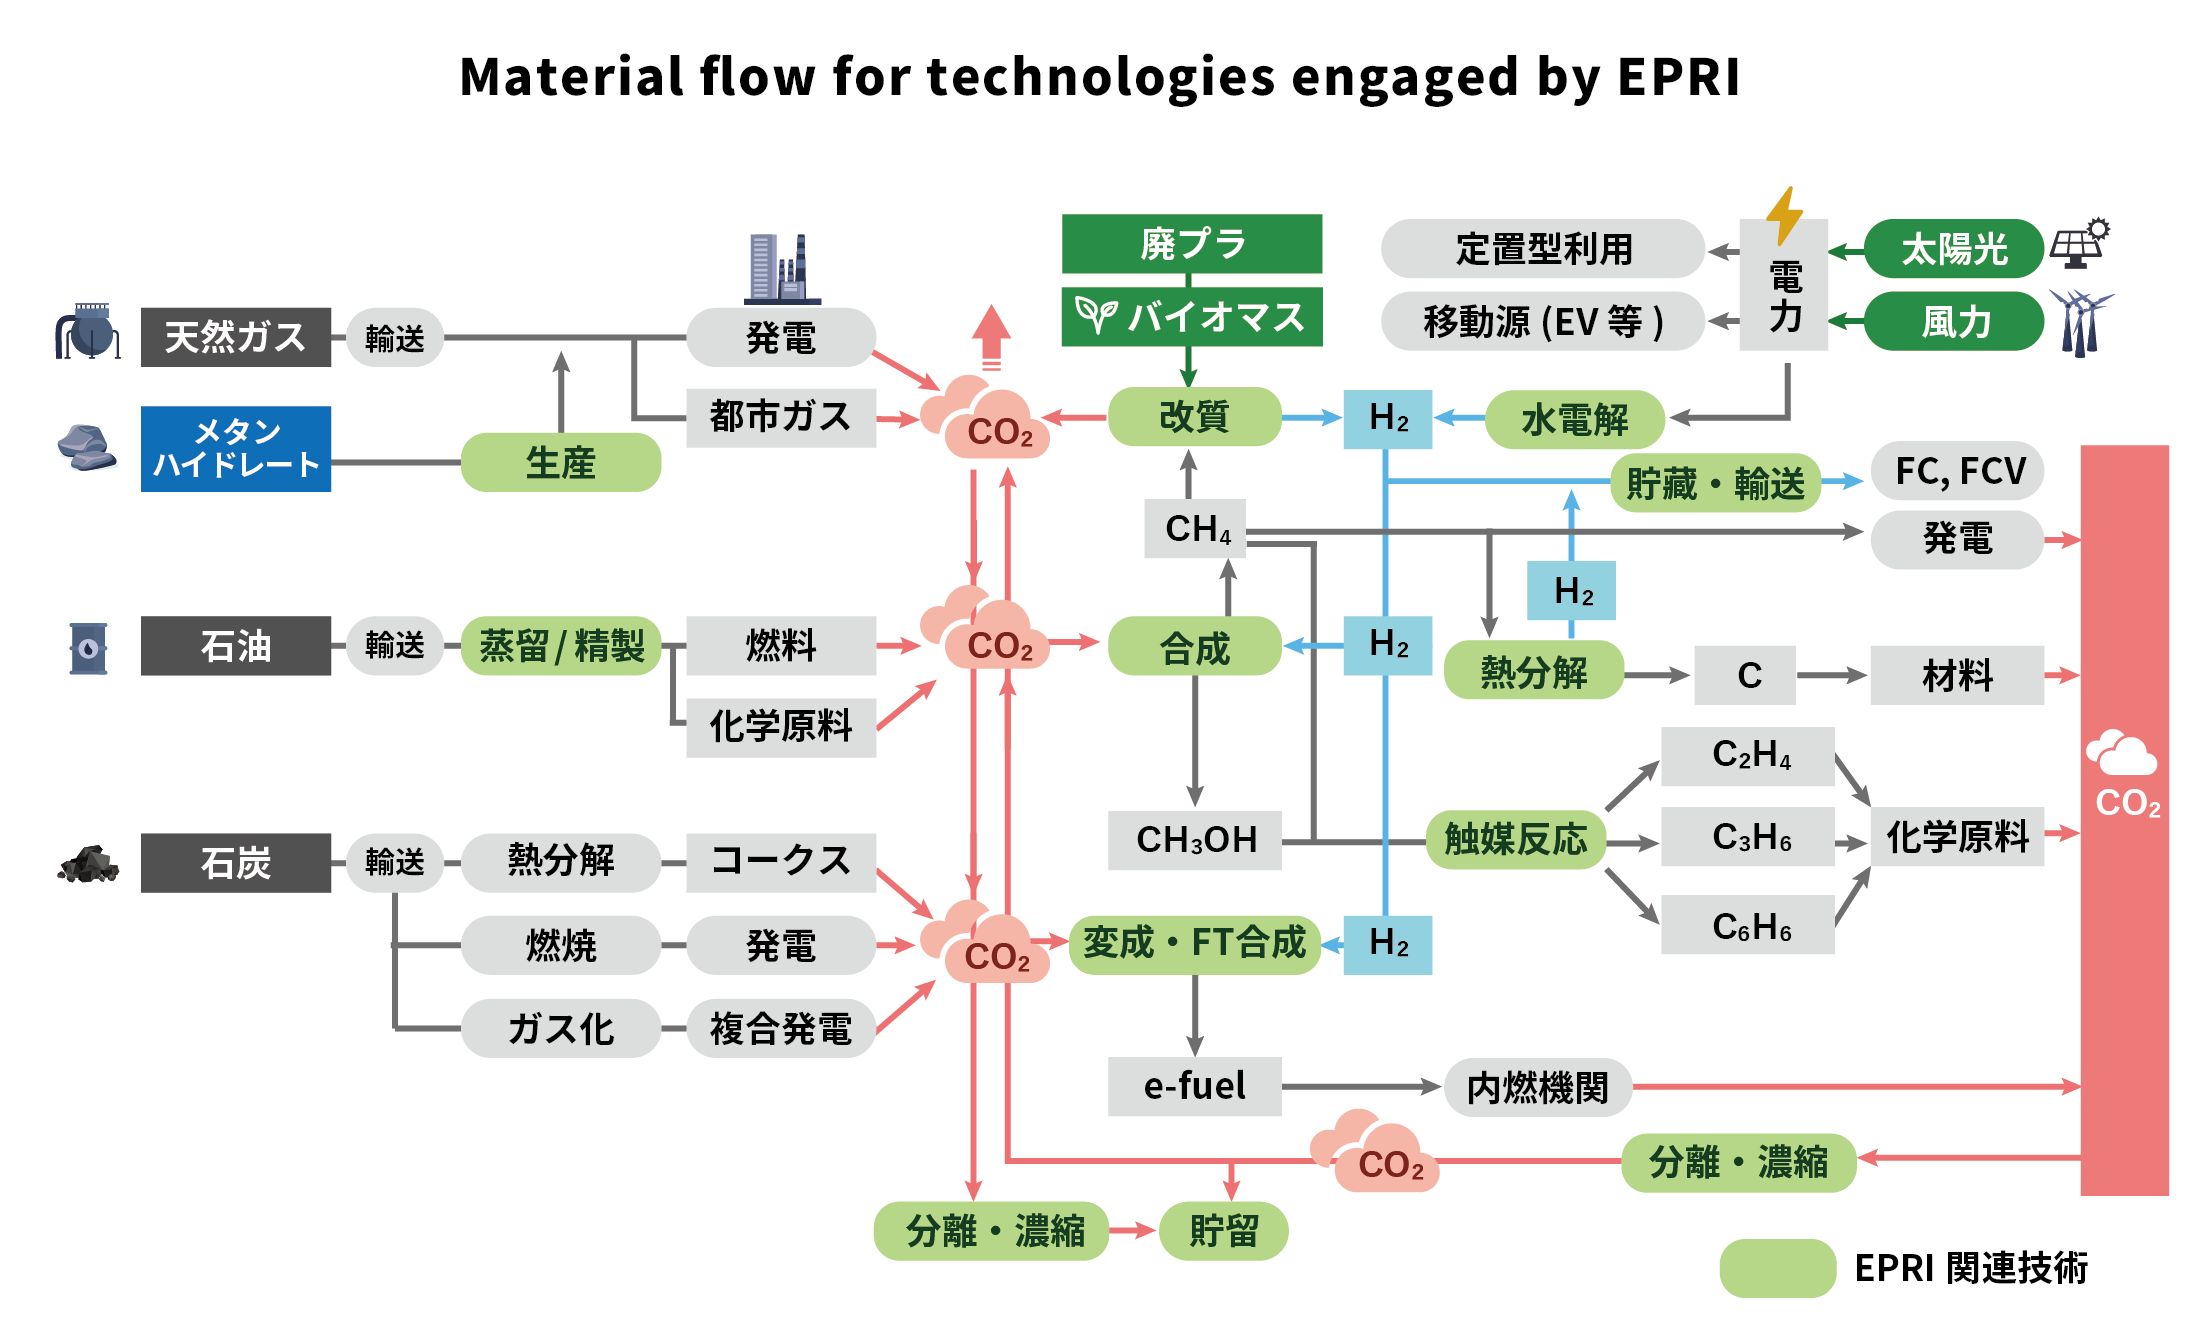 Place the cursor over an EPRI-related technology (EPRI関連技術) to see the name of the associated group.